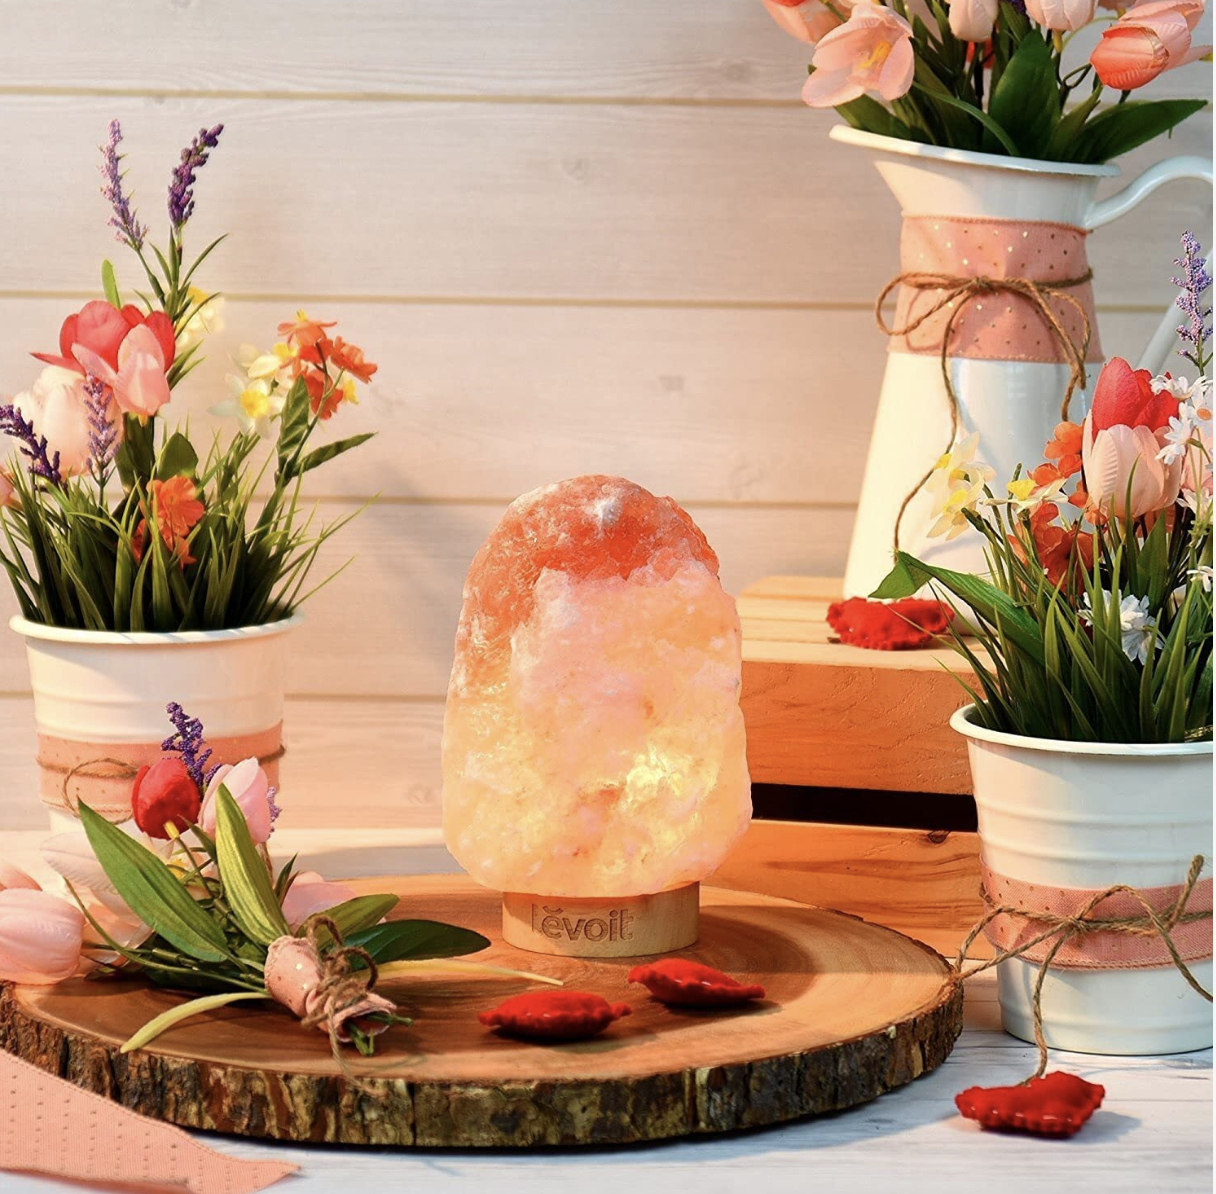 A salt lamp on a counter surrounded by flowers